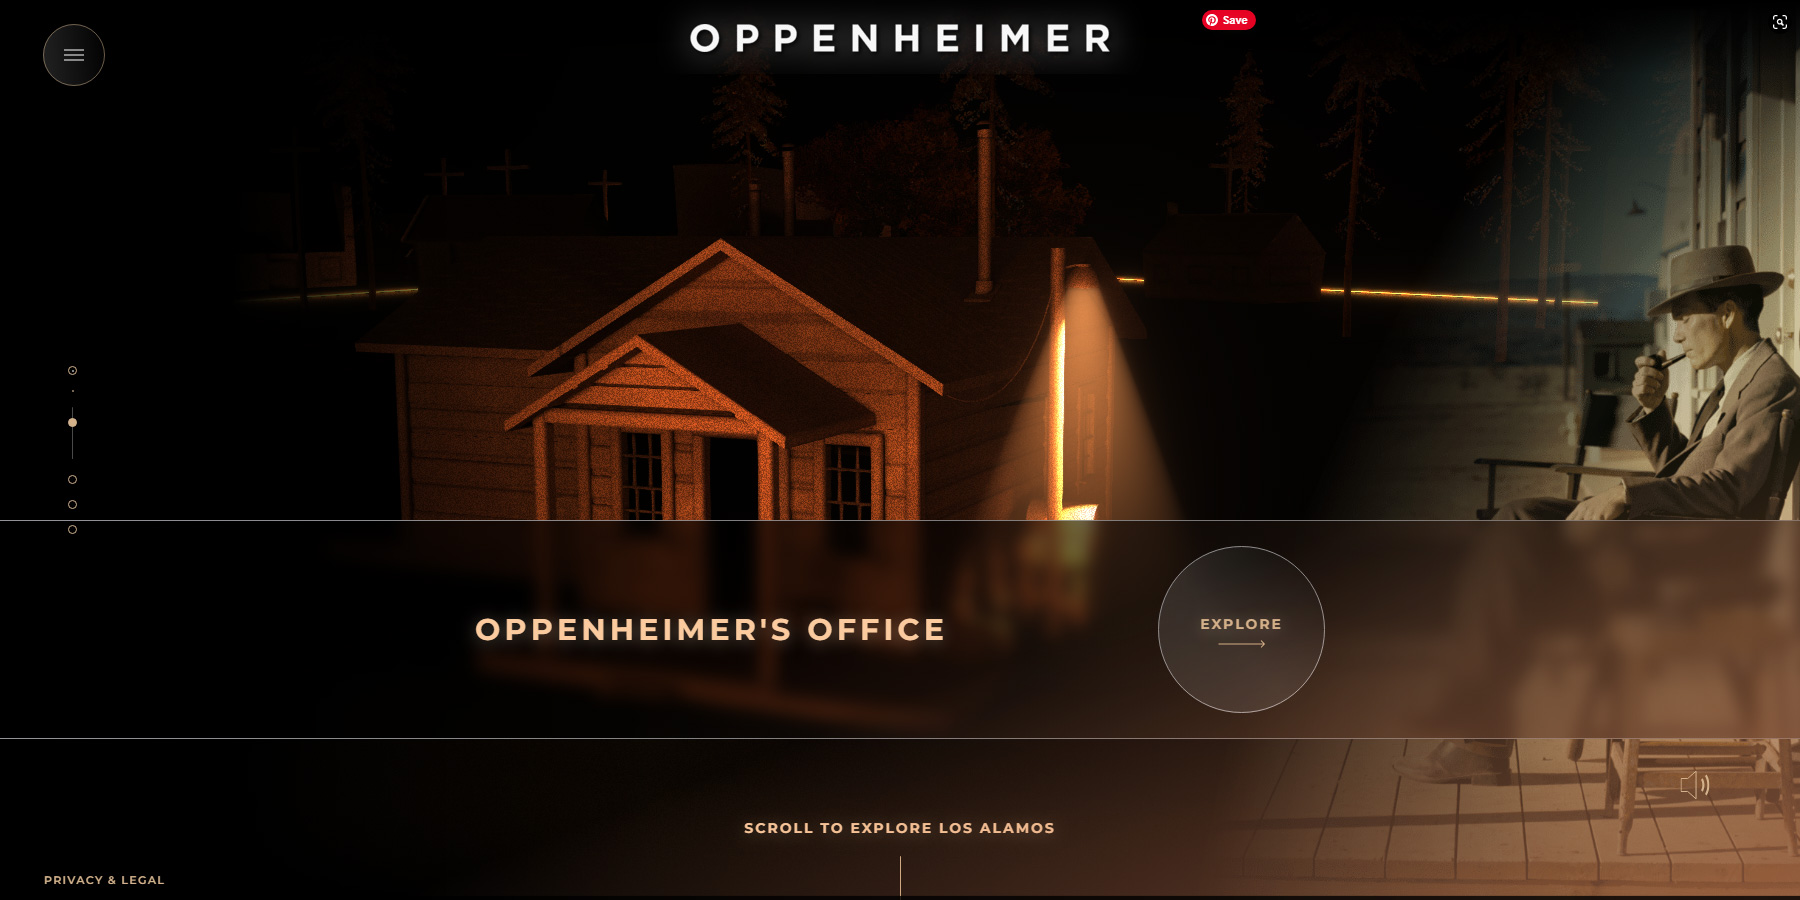 Oppenheimer - Official Site - Website of the Day